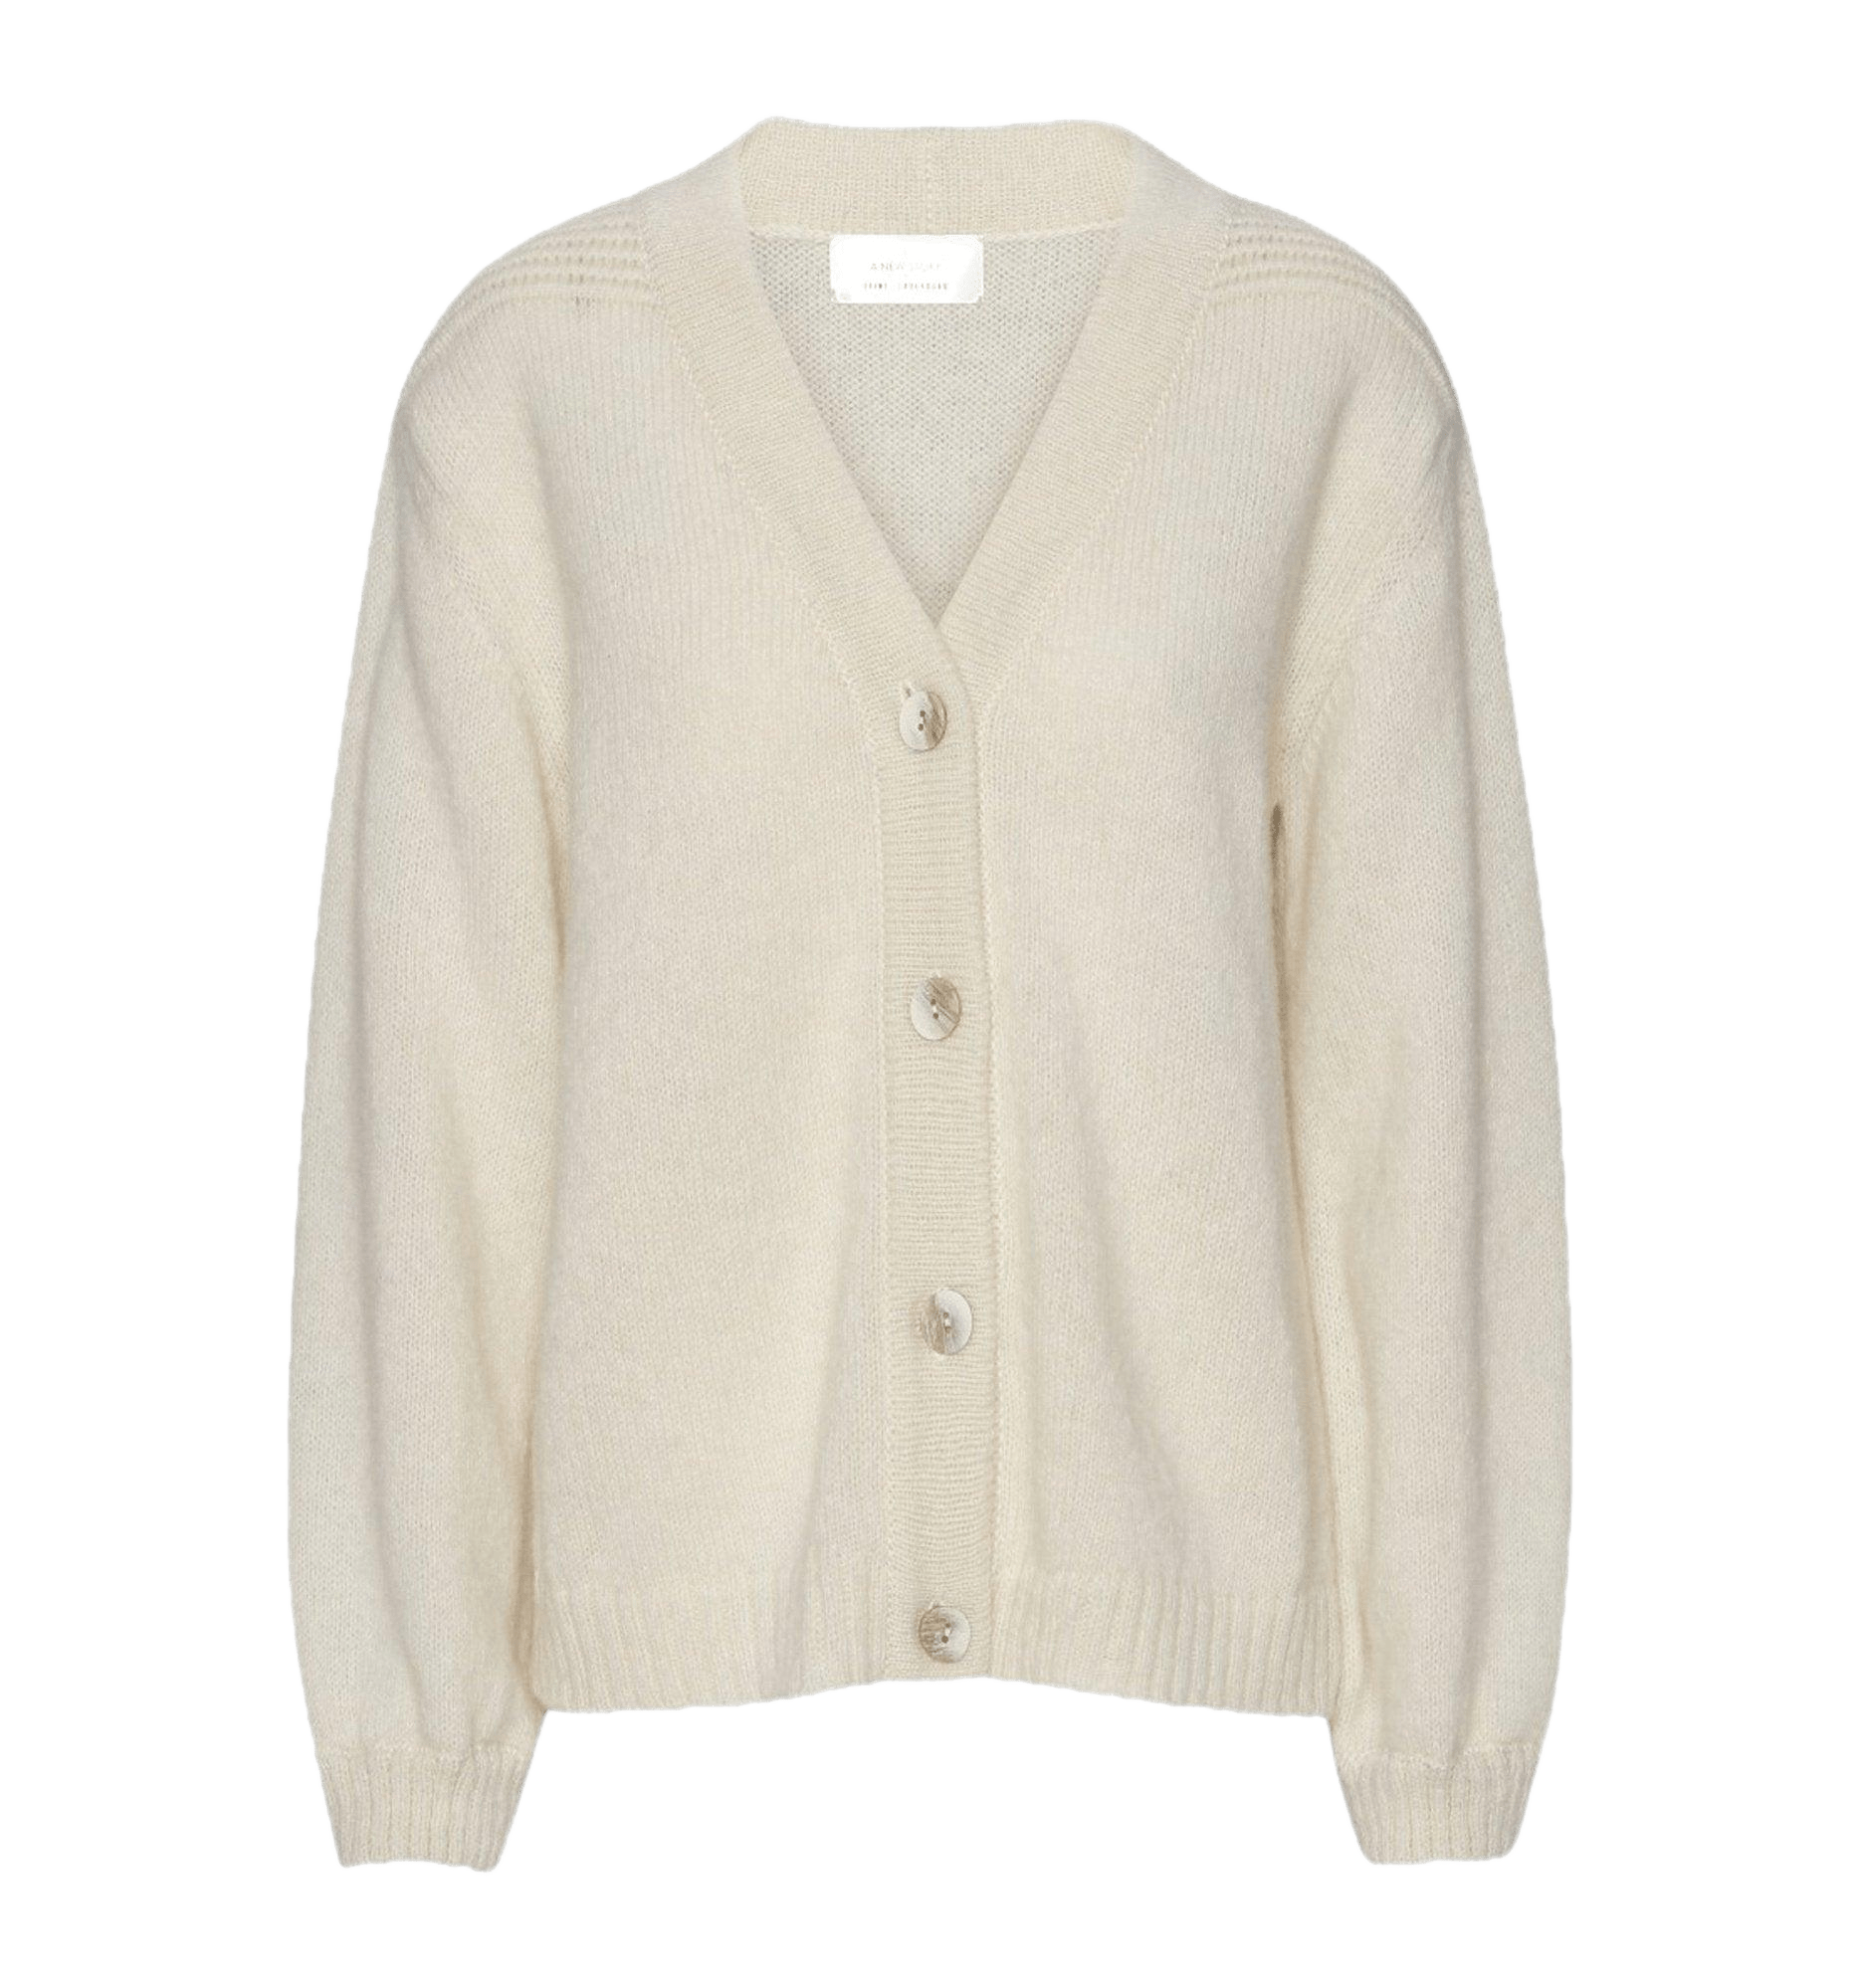 Rio Cardigan af norsk uld - A New Story